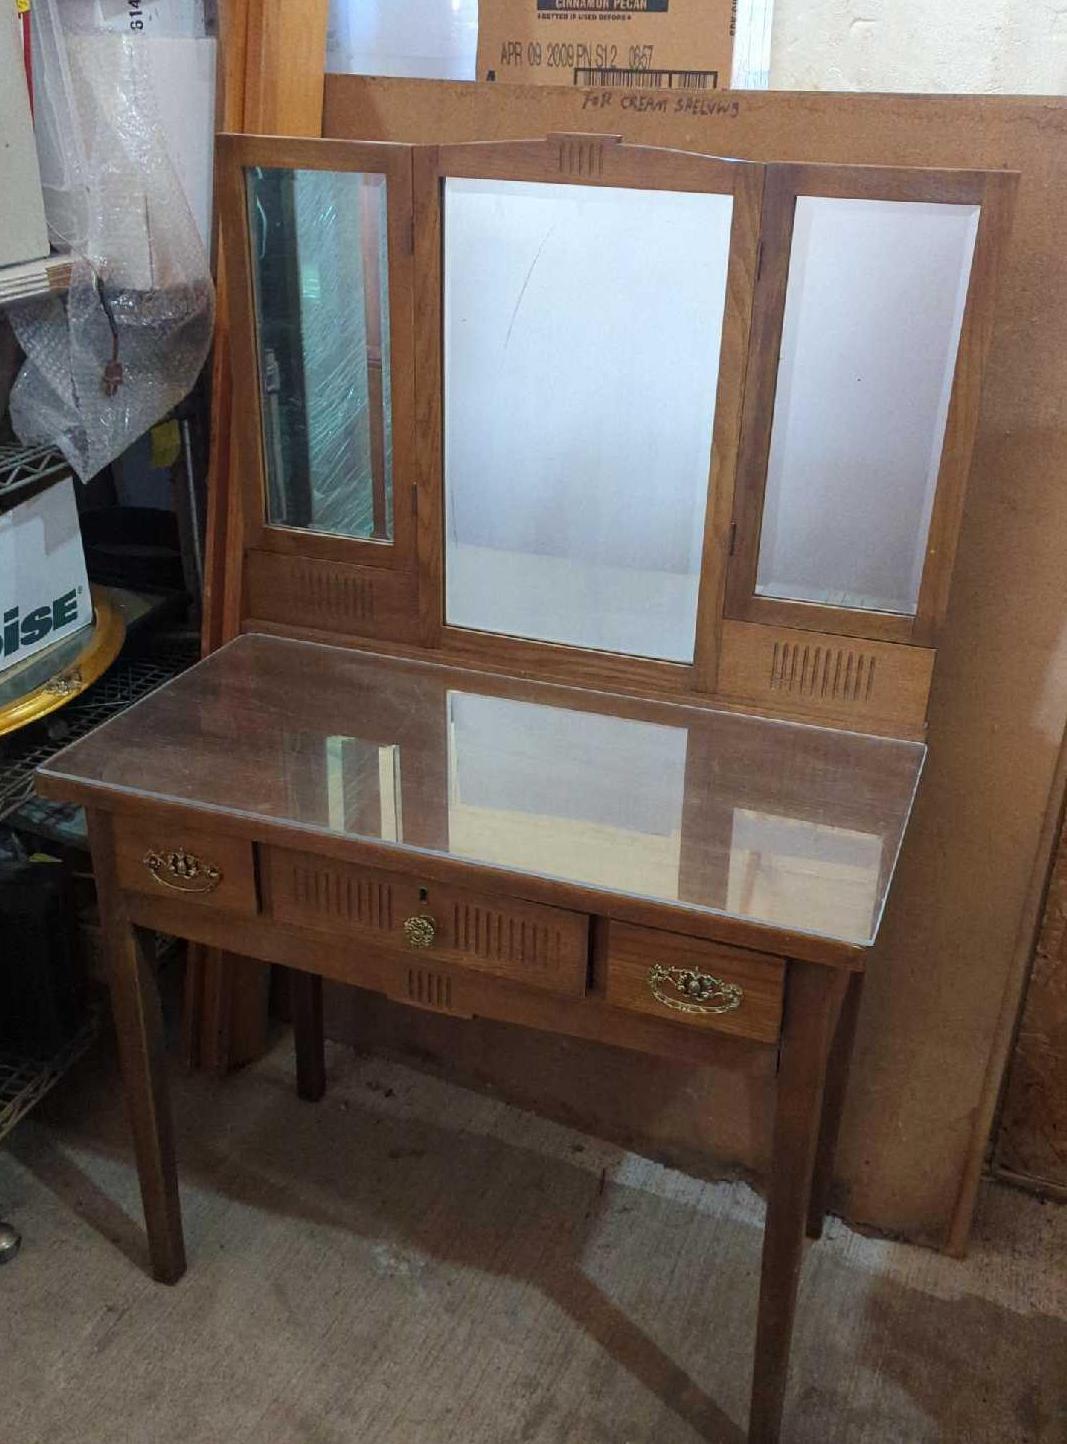 ANTIQUE OAK MIRRORED VANITY WITH CHAIR 55.5x36"x19